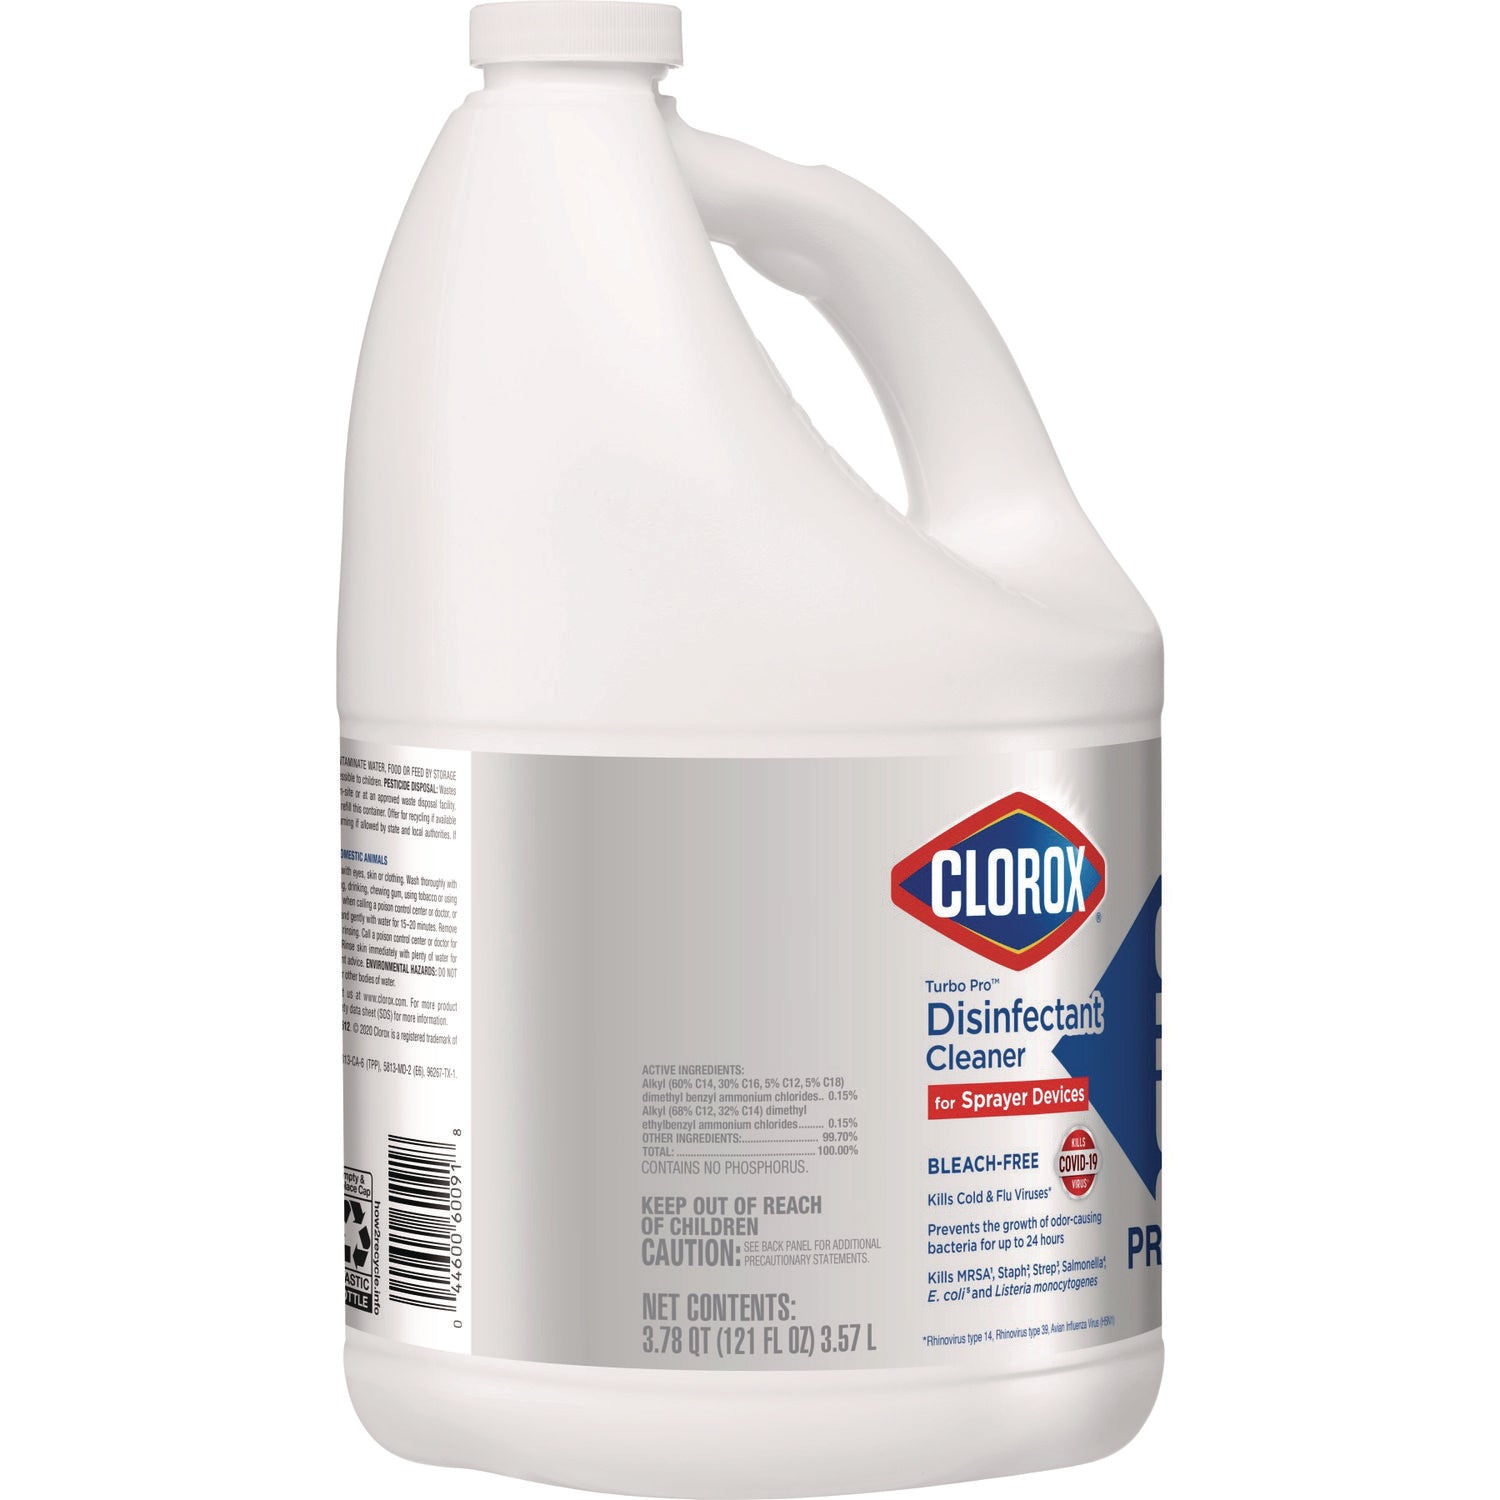 Turbo Pro Disinfectant Cleaner for Sprayer Devices, 121 oz Bottle, 3/Carton - 2